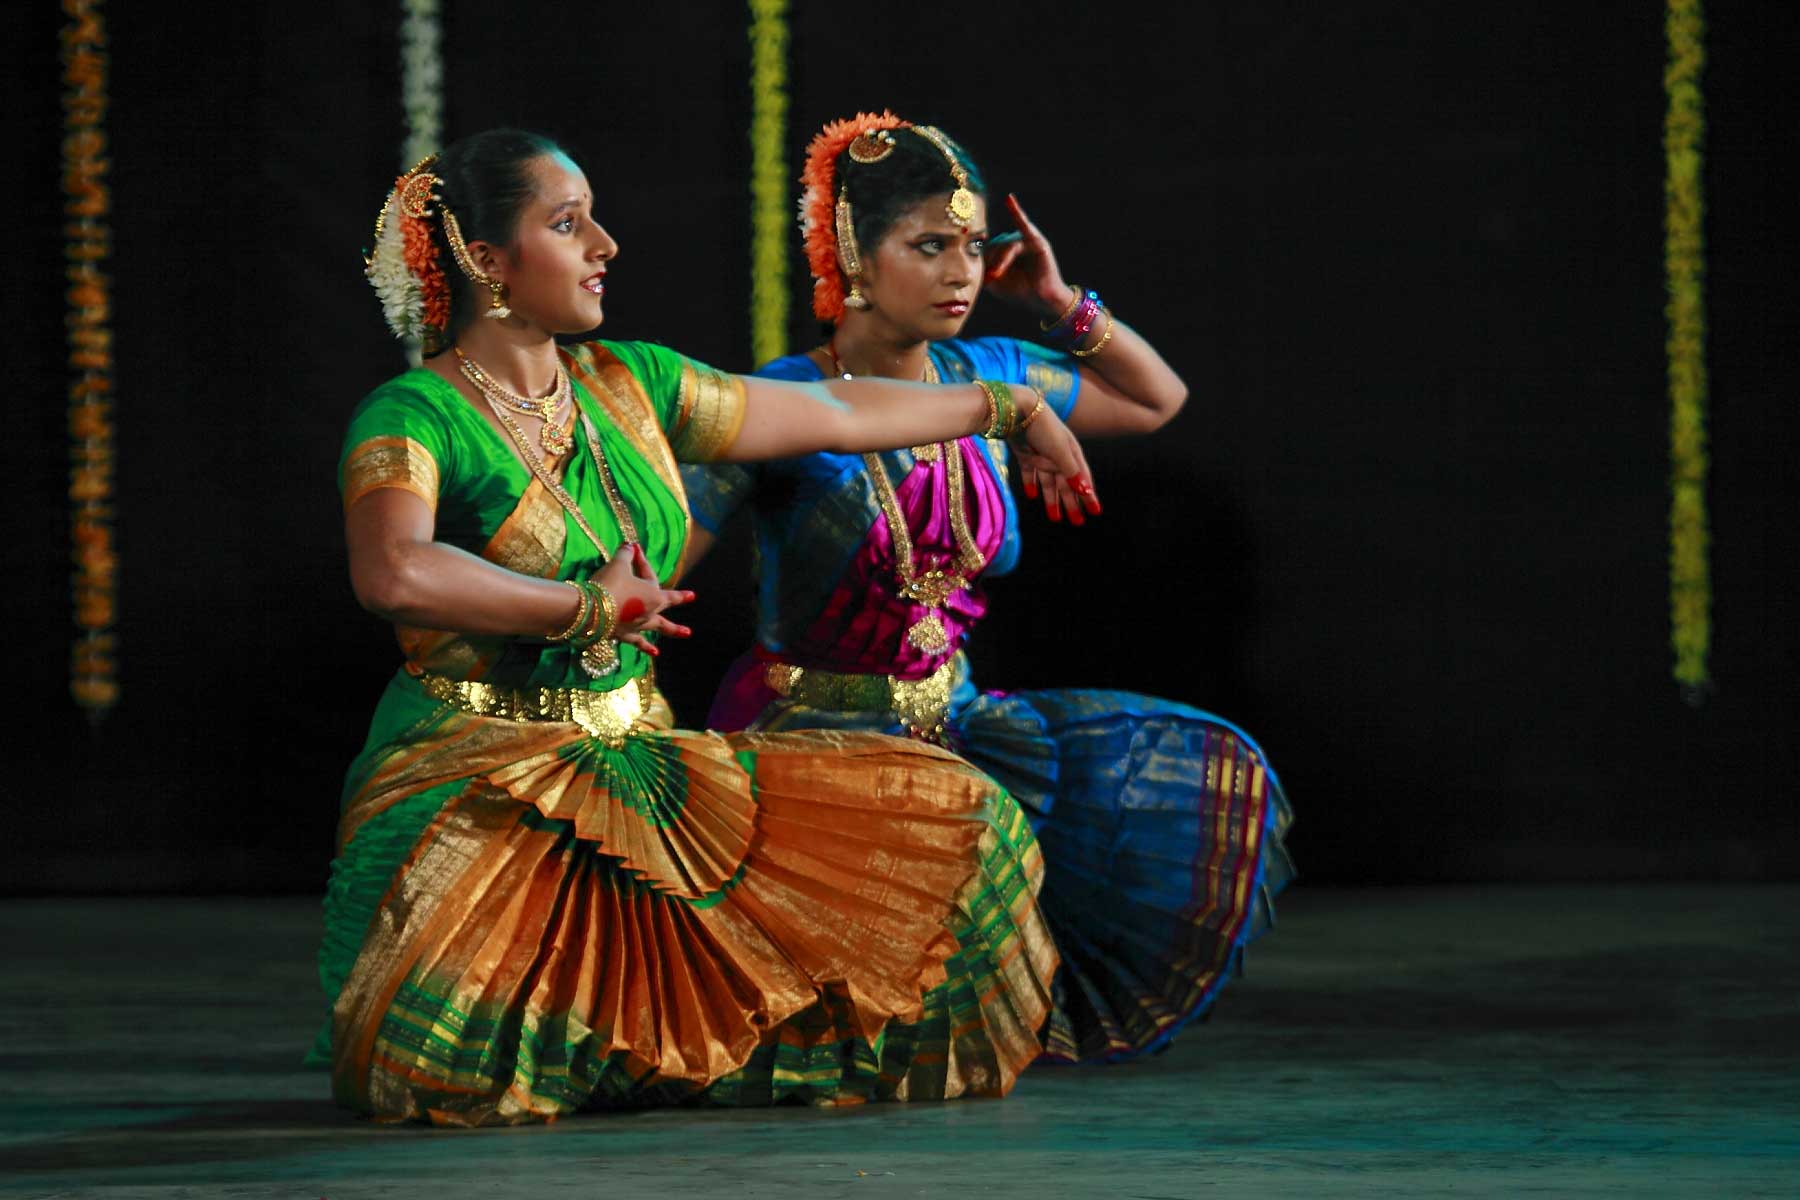 two women in colorful costume are doing a dance